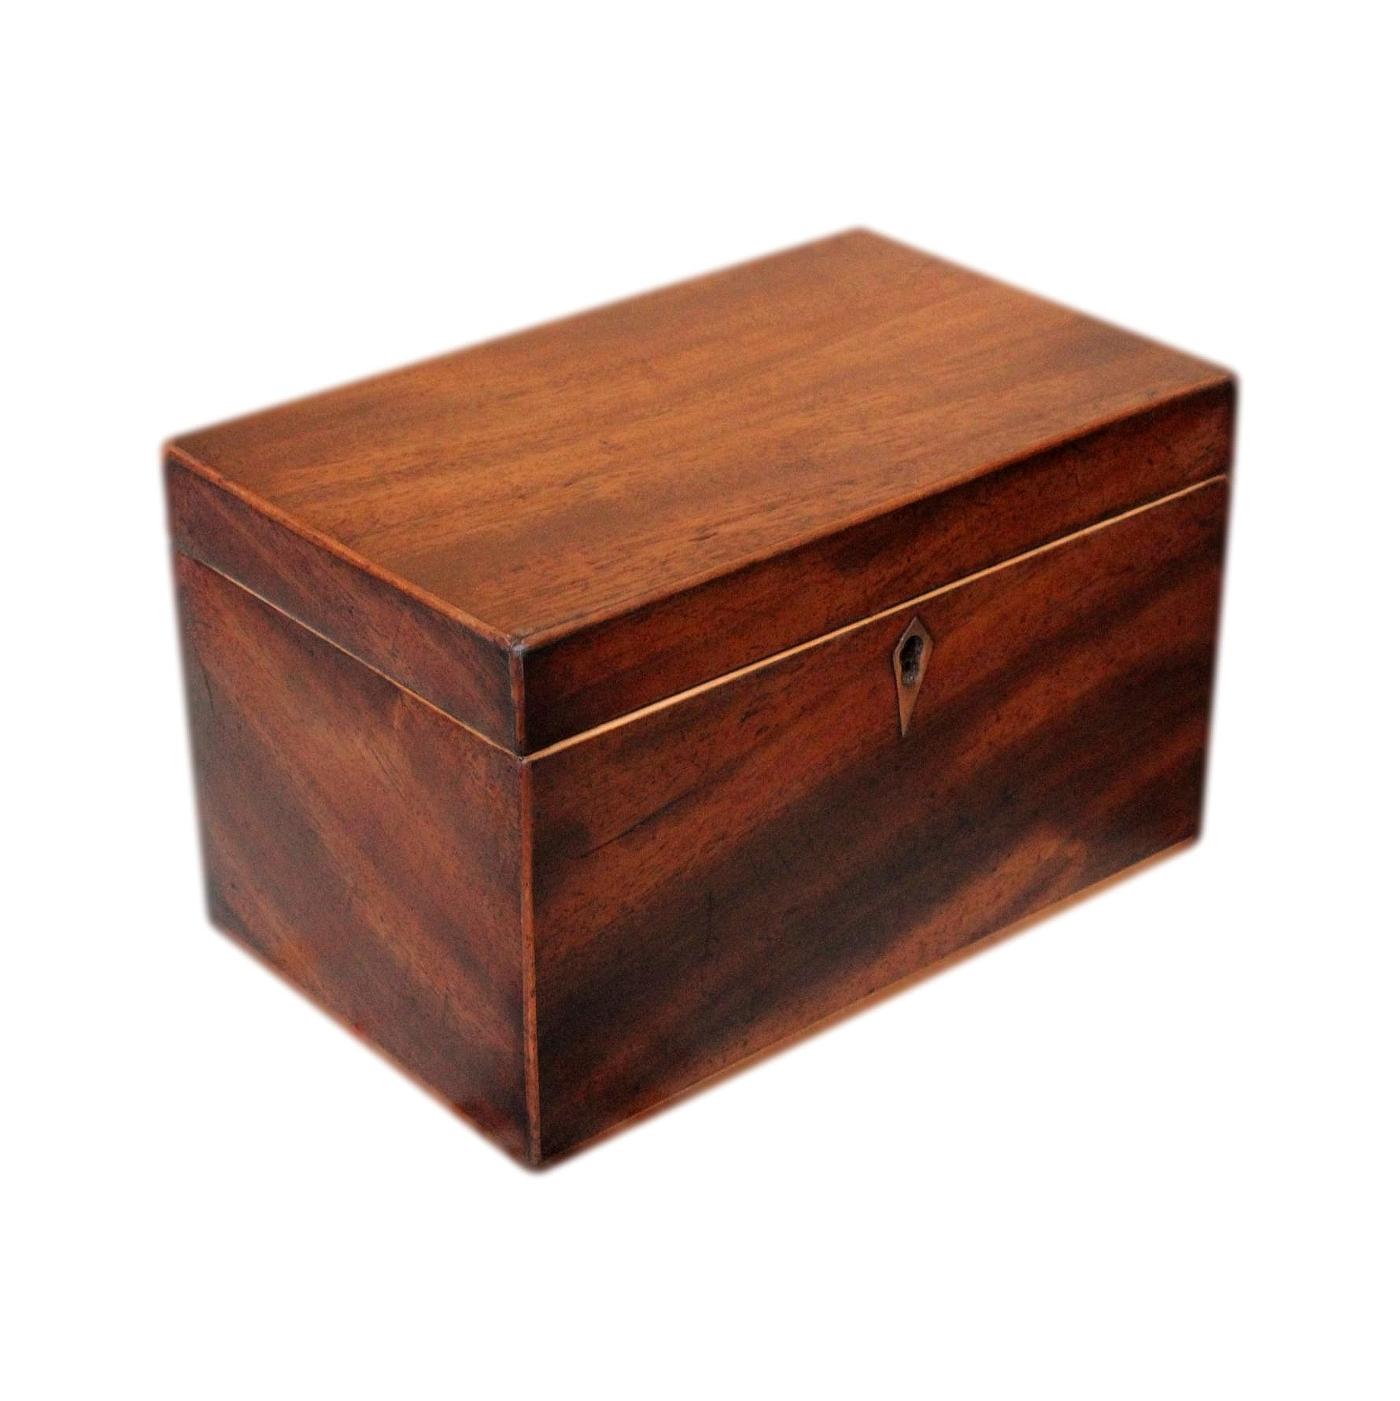 Refurbished Satin Lined Antique Jewellery Box